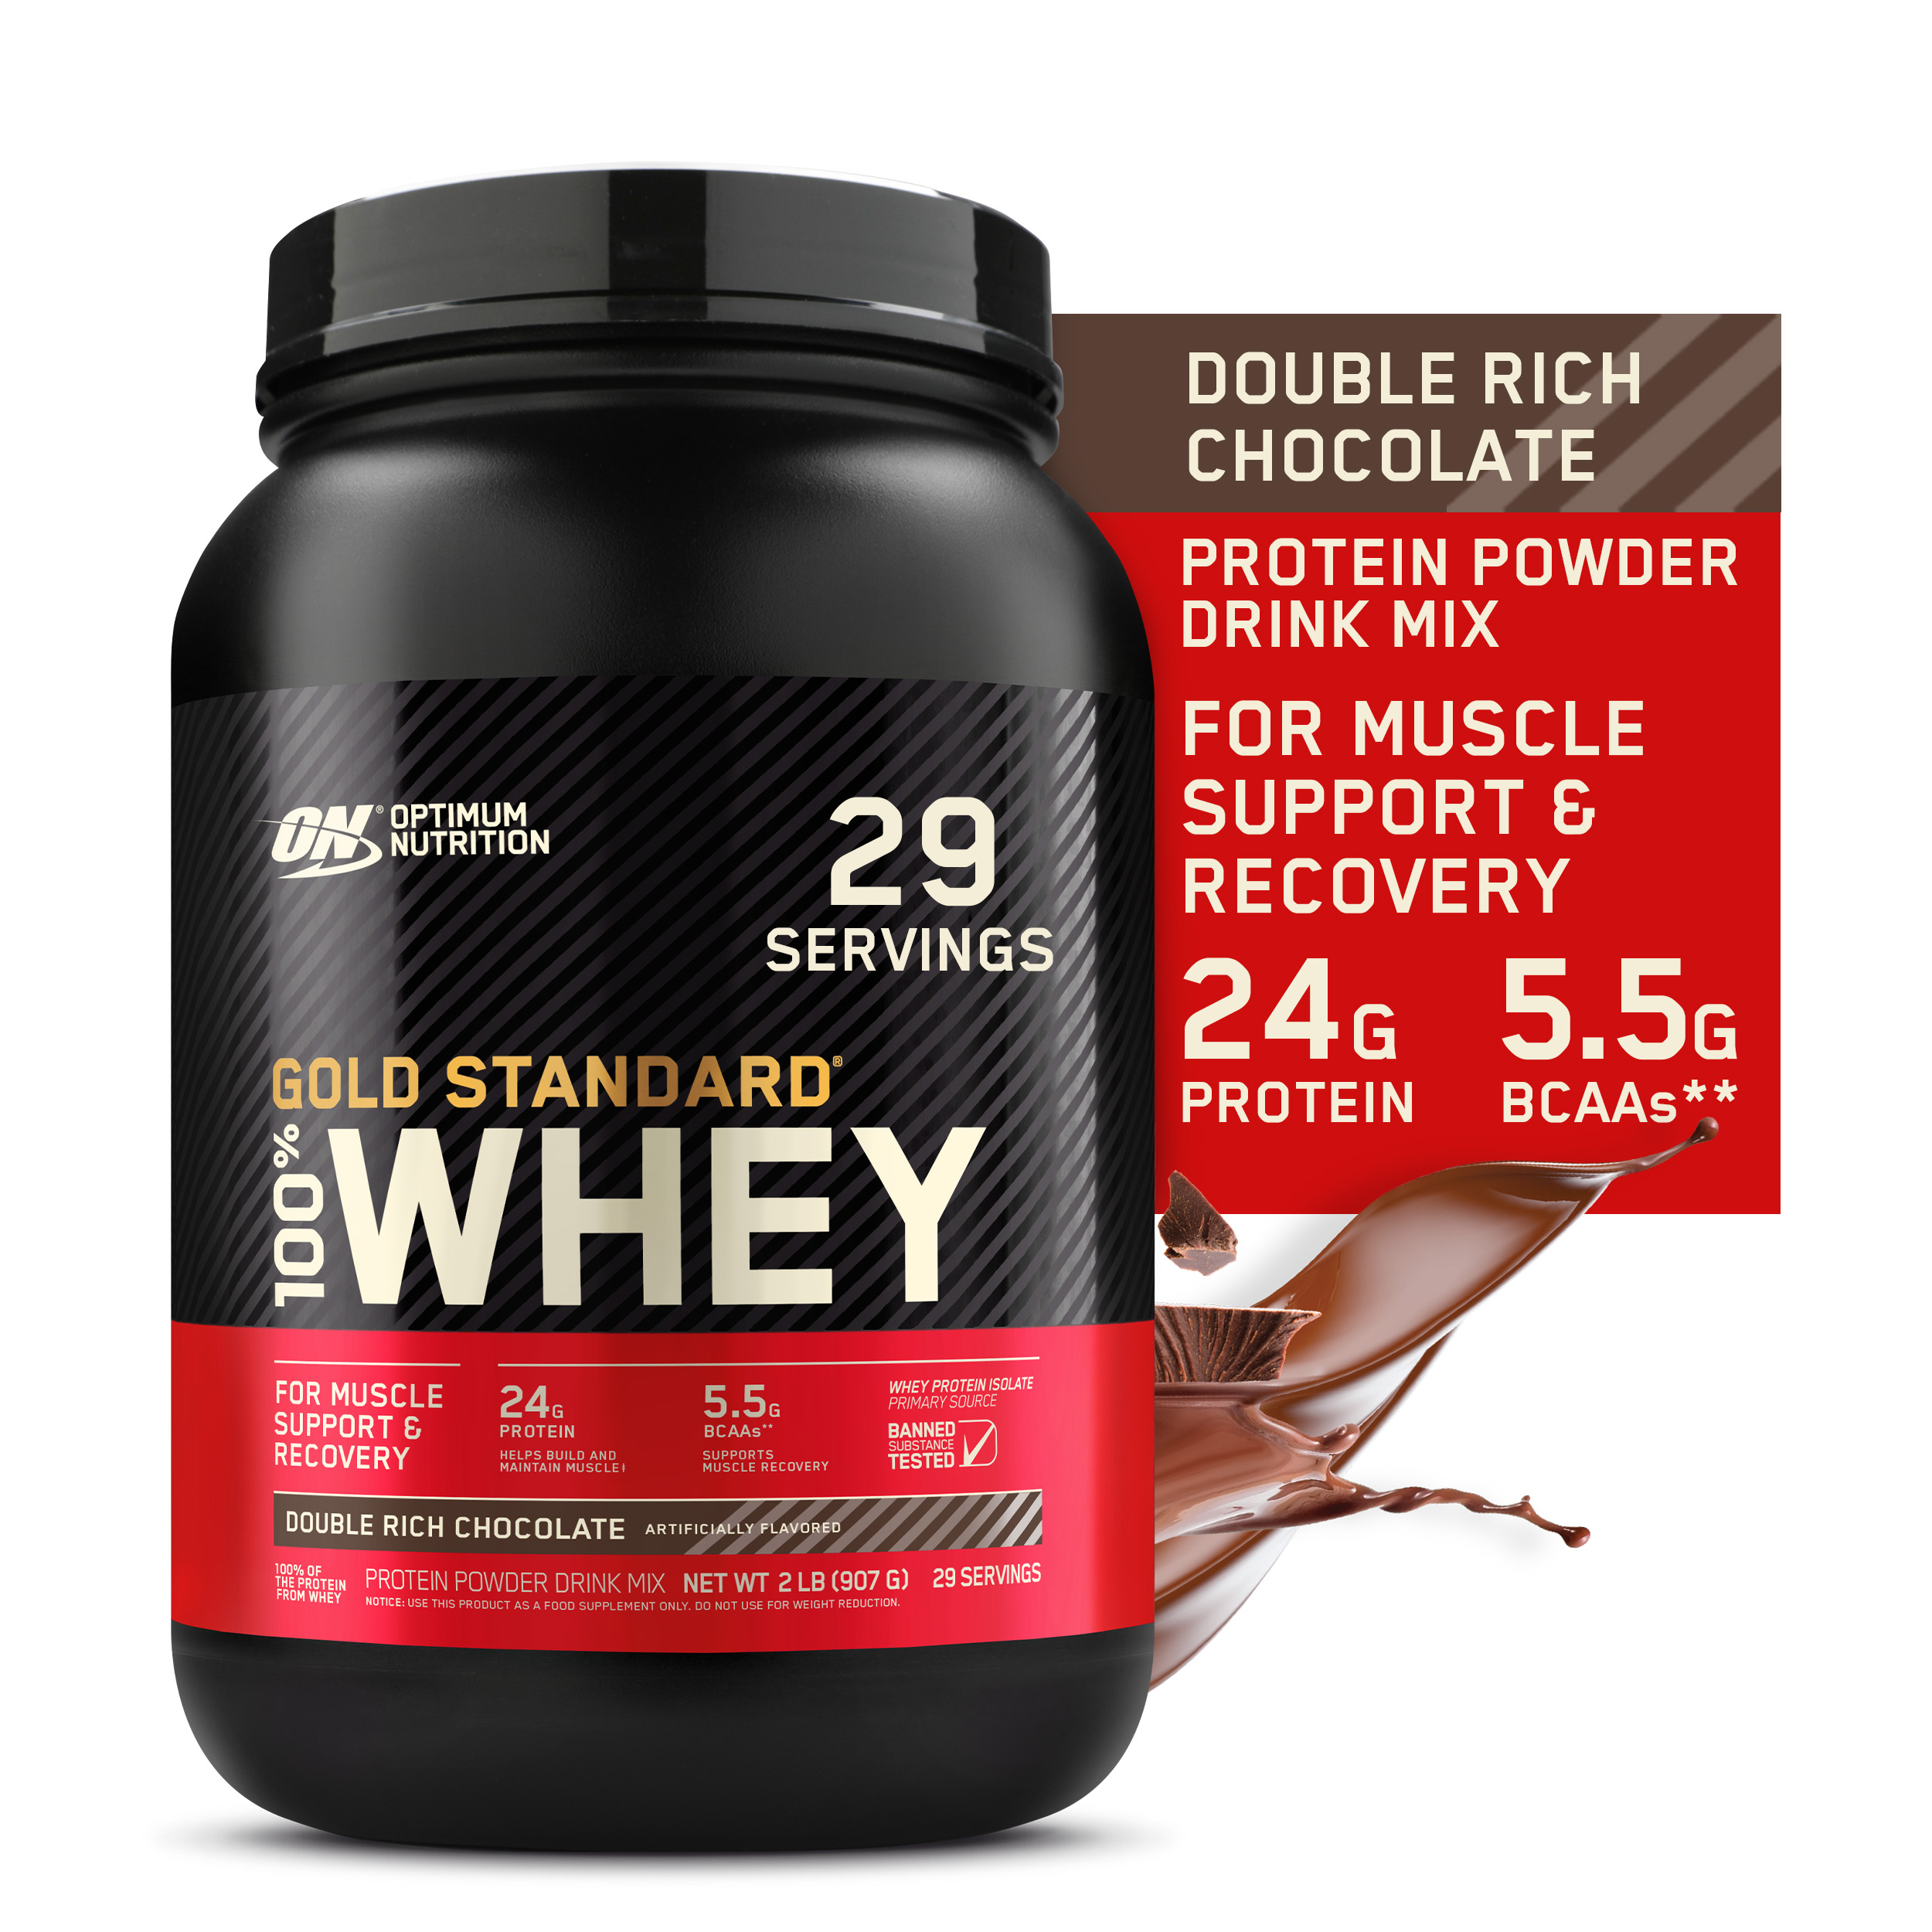 Optimum Nutrition, Gold Standard 100% Whey Protein Powder, Double Rich Chocolate, 2 lb, 29 Servings - image 1 of 10